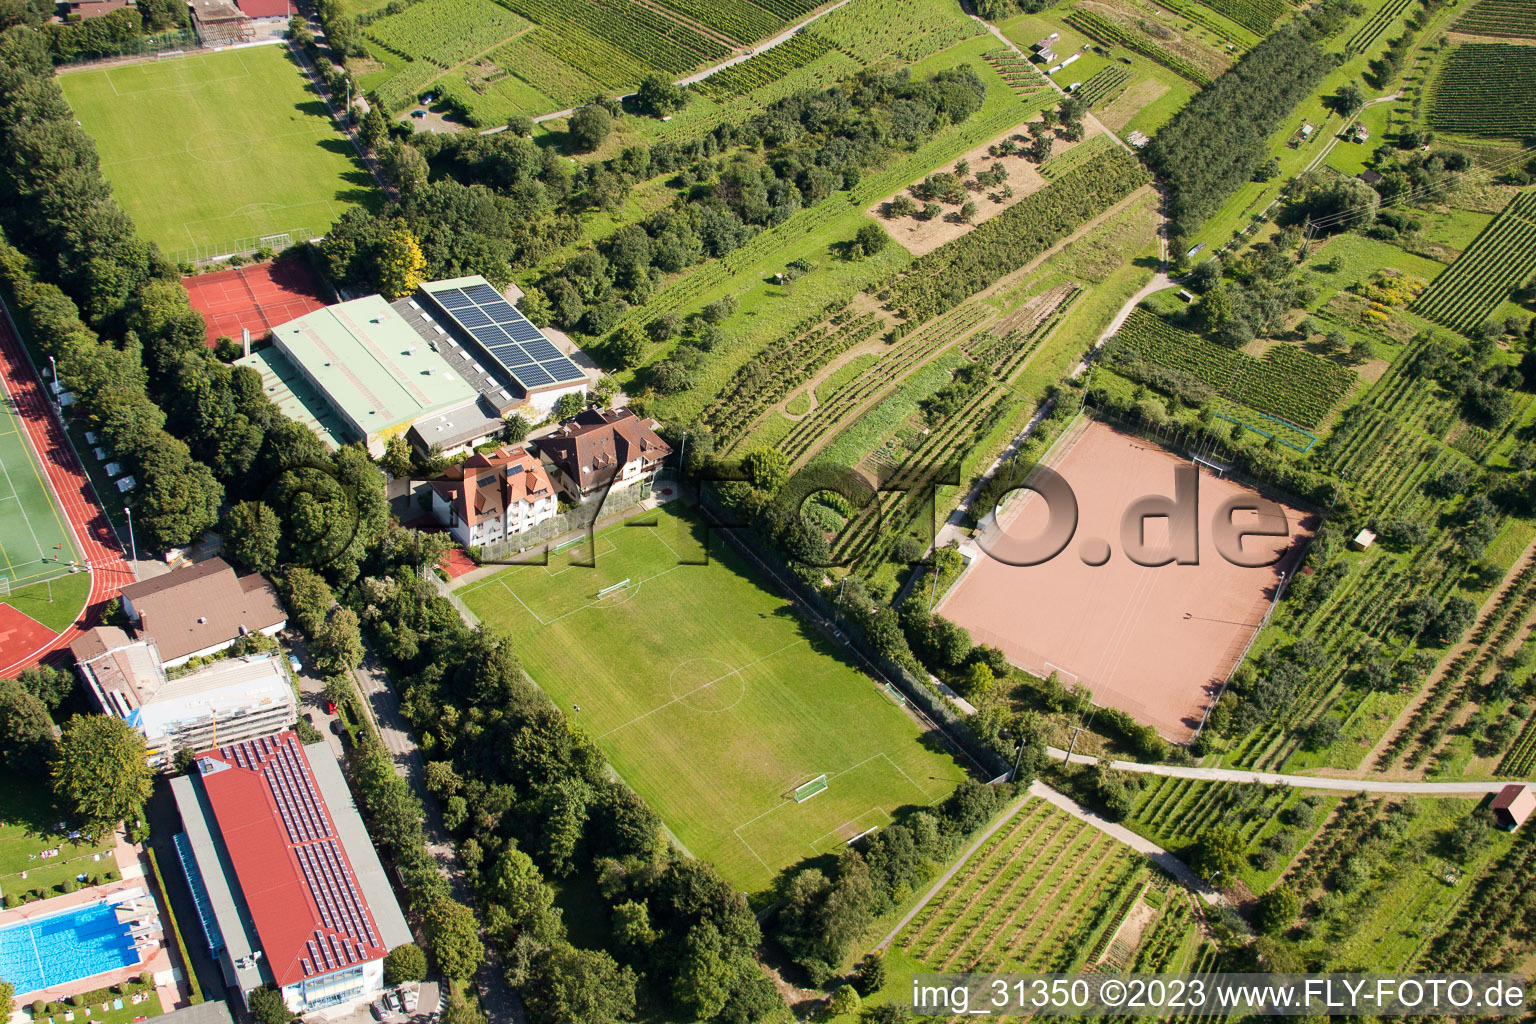 South Baden Sports School, FC Neuweier in the district Steinbach in Baden-Baden in the state Baden-Wuerttemberg, Germany from the plane